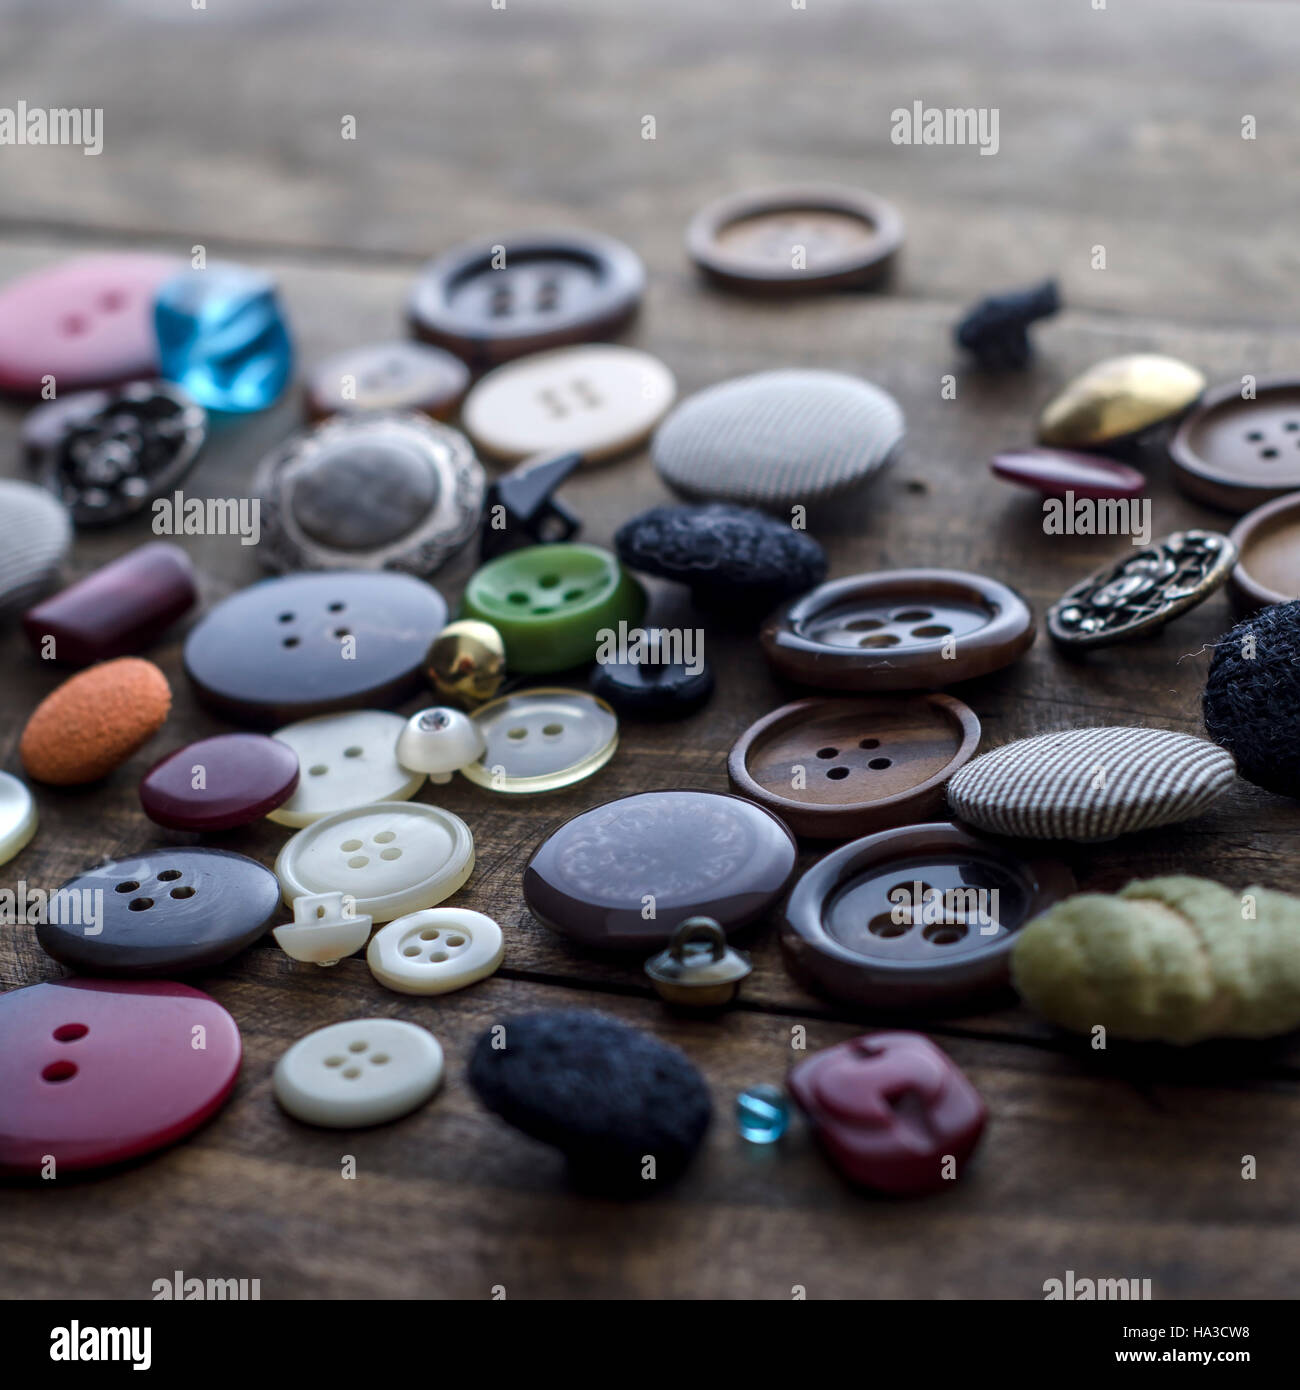 Lot of vintage buttons on old wooden table, close up Stock Photo